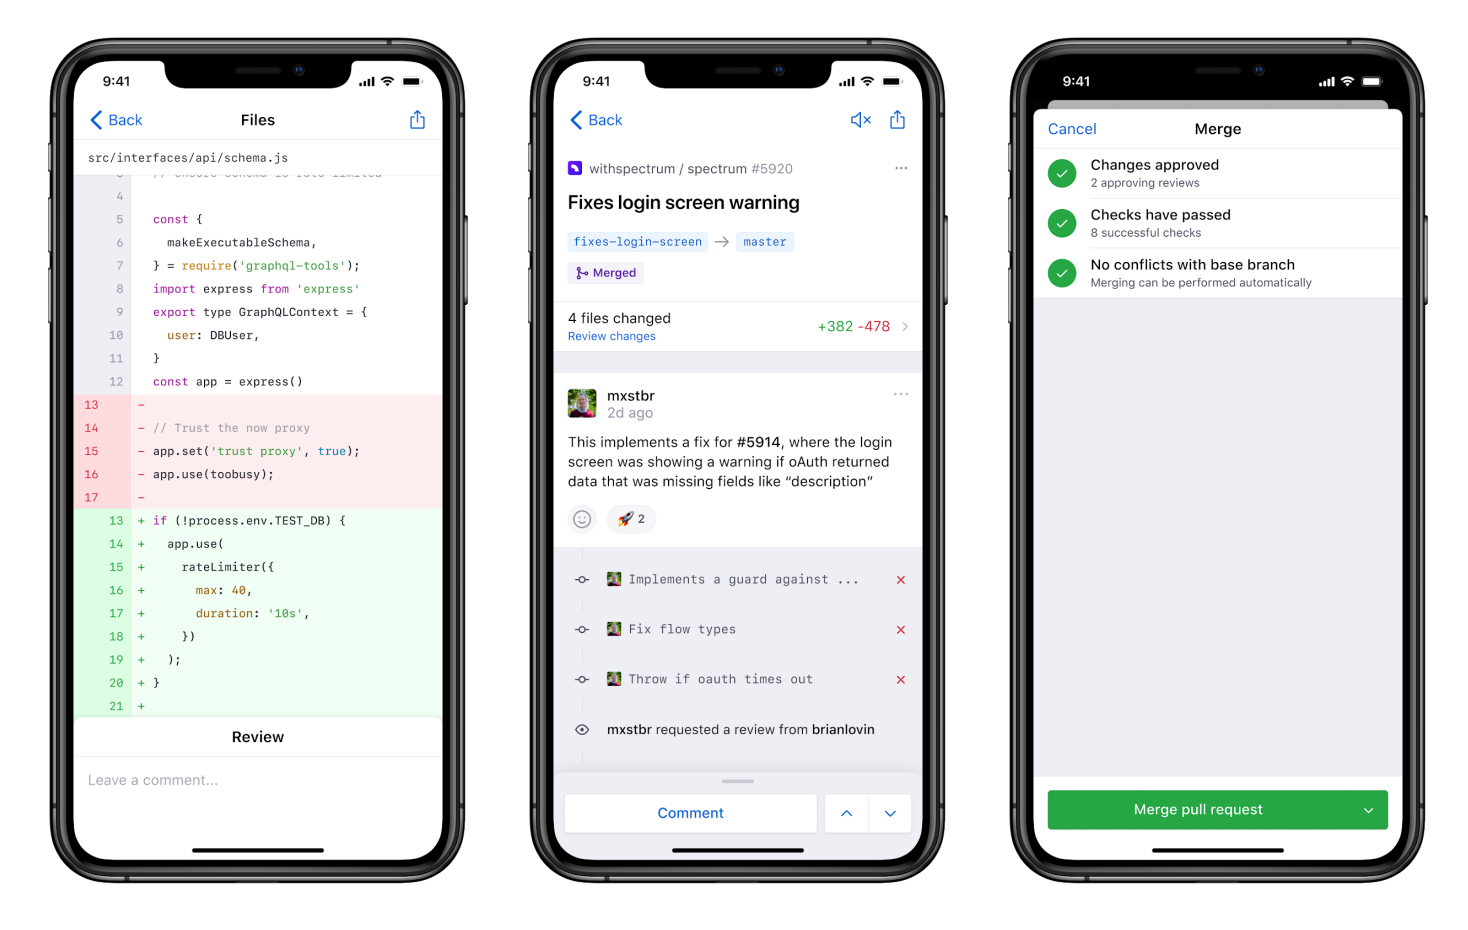 GitHub beta app is now available for iOS